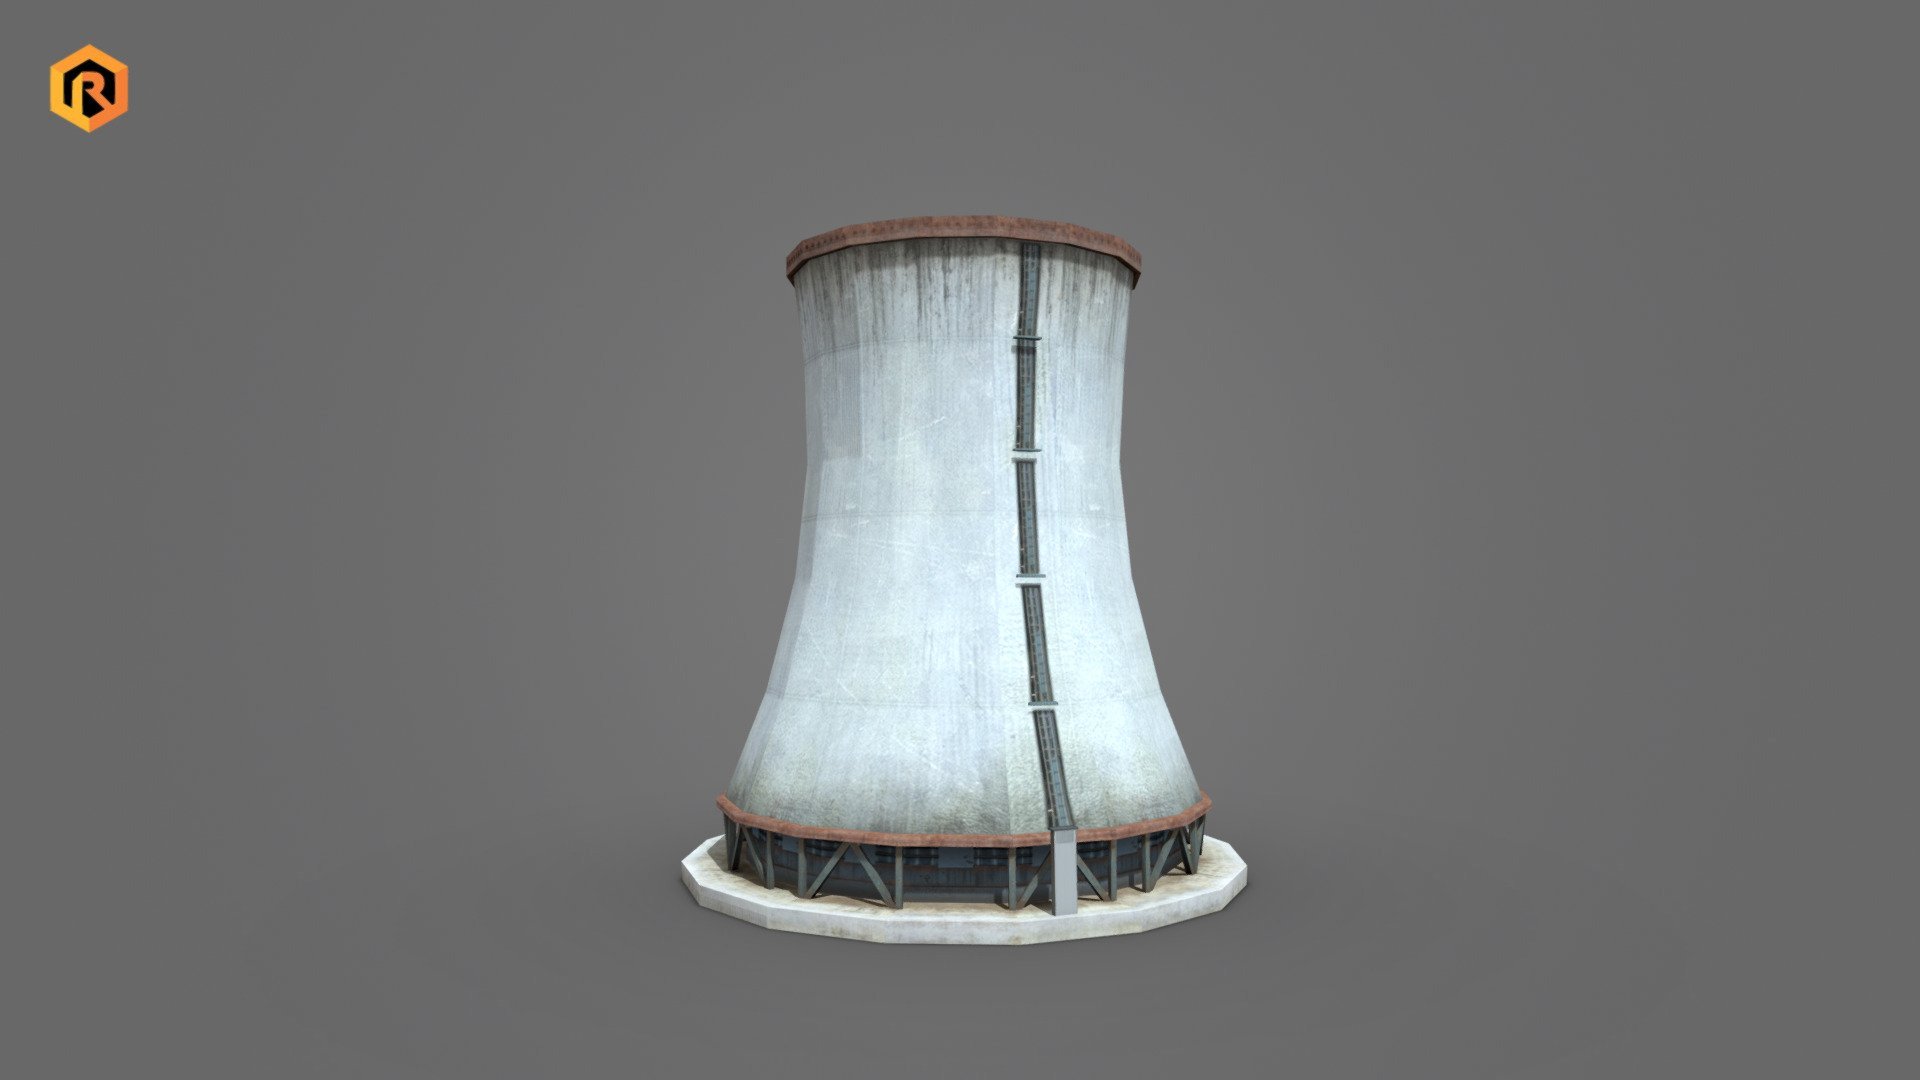 Low-poly 3D model of Big Wide Chimney.

It is best for use in games and other VR / AR, real-time applications such as Unity or Unreal Engine.  

It can also be rendered in Blender (ex Cycles) or Vray as the model is equipped with proper textures.    

You can also buy this model in a bundle: https://skfb.ly/ovQJB

Technical details:  




2048x Diffuse and AO texture set  

862 Triangles  

626 Vertices  

Model is one mesh   

Model completely unwrapped   

All nodes, materials and textures are appropriately named   

Lot of additional file formats included (Blender, Unity, Maya etc.)   

More file formats are available in additional zip file on product page.

Please feel free to contact me if you have any questions or need any support for this asset.

Support e-mail: support@rescue3d.com - Big Wide Chimney - Buy Royalty Free 3D model by Rescue3D Assets (@rescue3d) 3d model